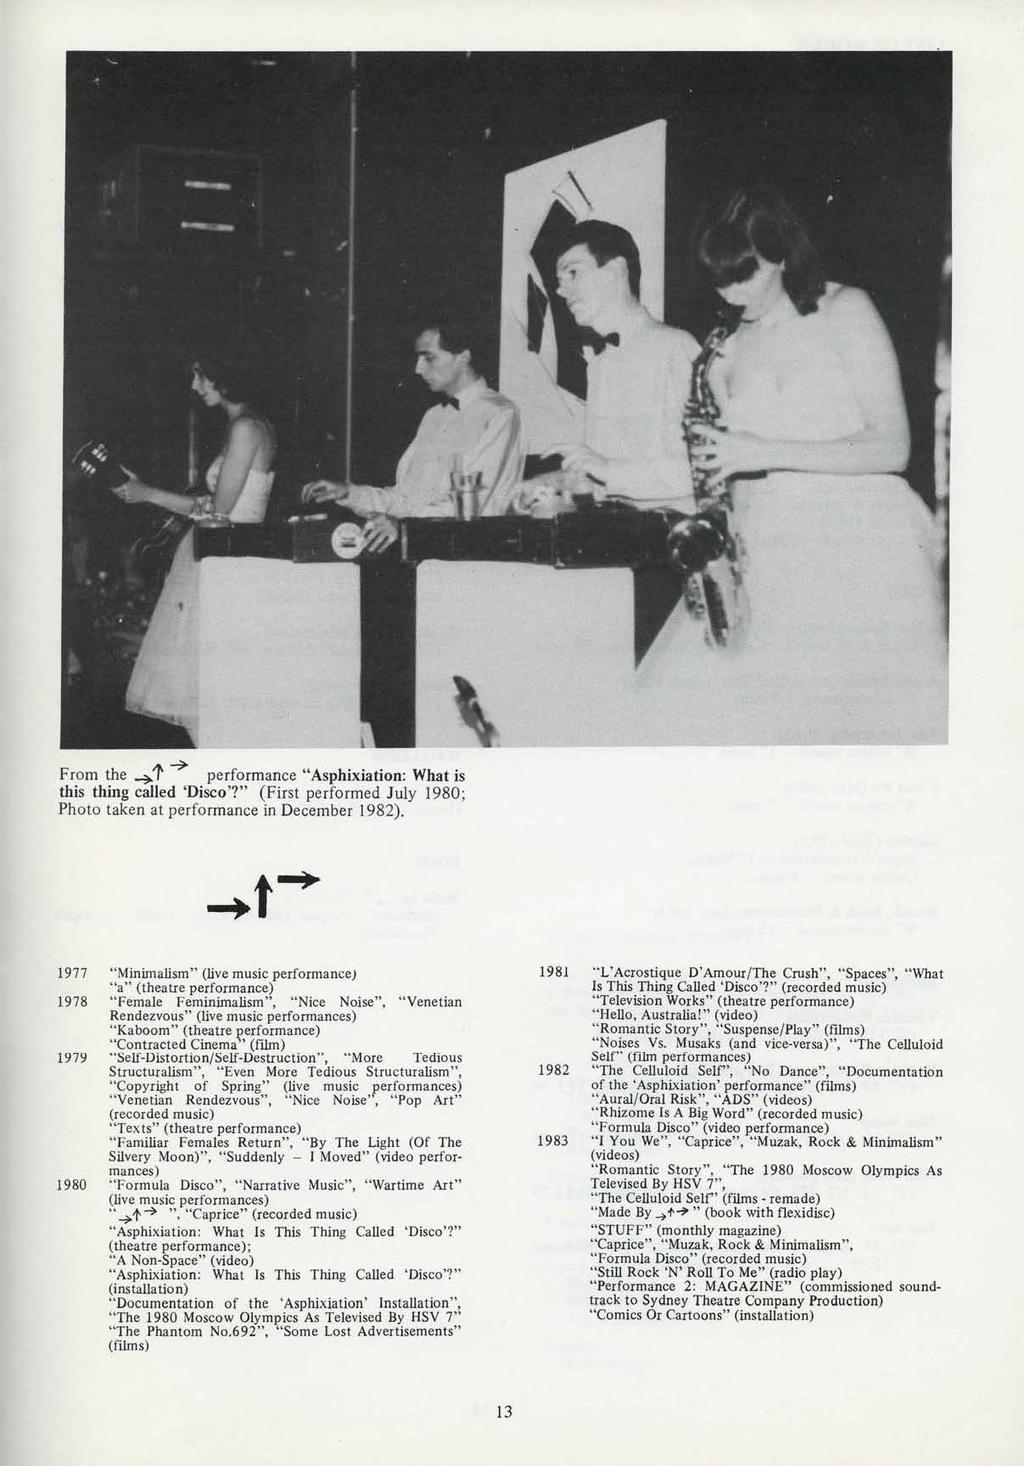 From the -'»1-7 performance "Asphixiation: What is this thing called 'Disco'?" (First performed July 1980; Photo taken at performance in December 1982).